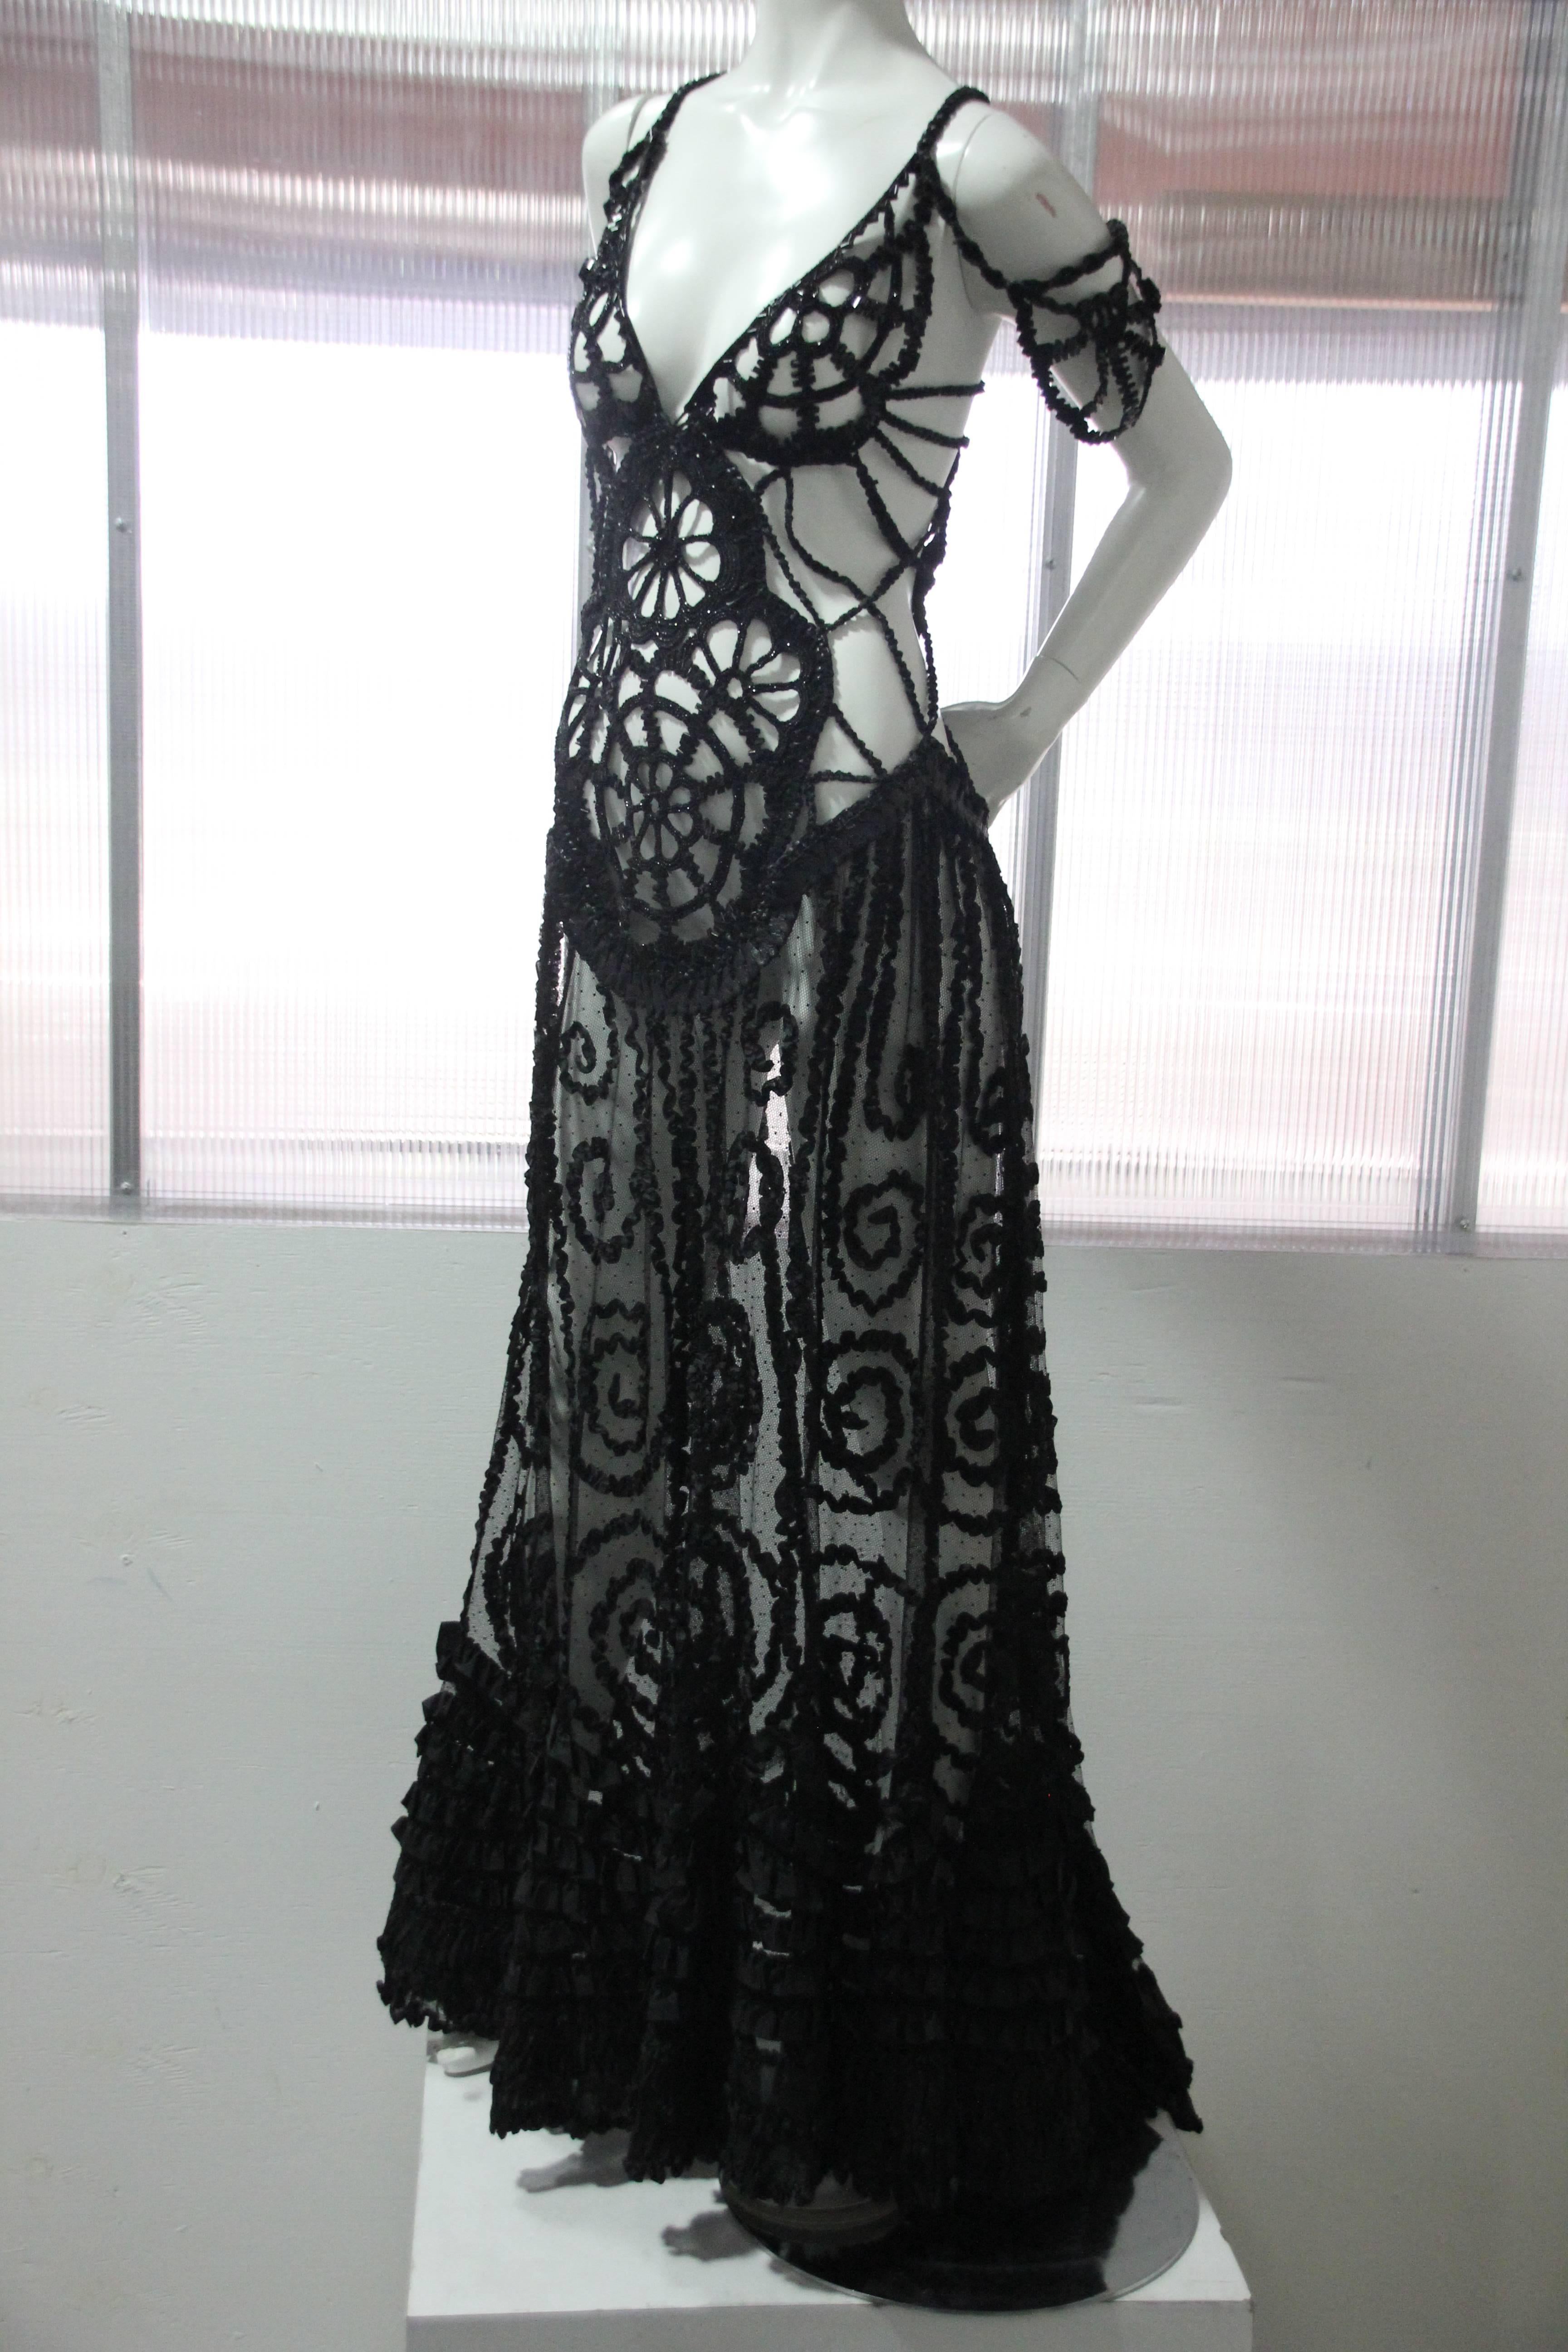 Custom-made black peek-a-boo gown: Flared skirt with train is constructed of pointe d'esprit silk tulle with rows of narrow silk ruffles.  Bodice is constructed of braided and macrame leather and trimmed with Victorian black jet beadwork. Slip-on,